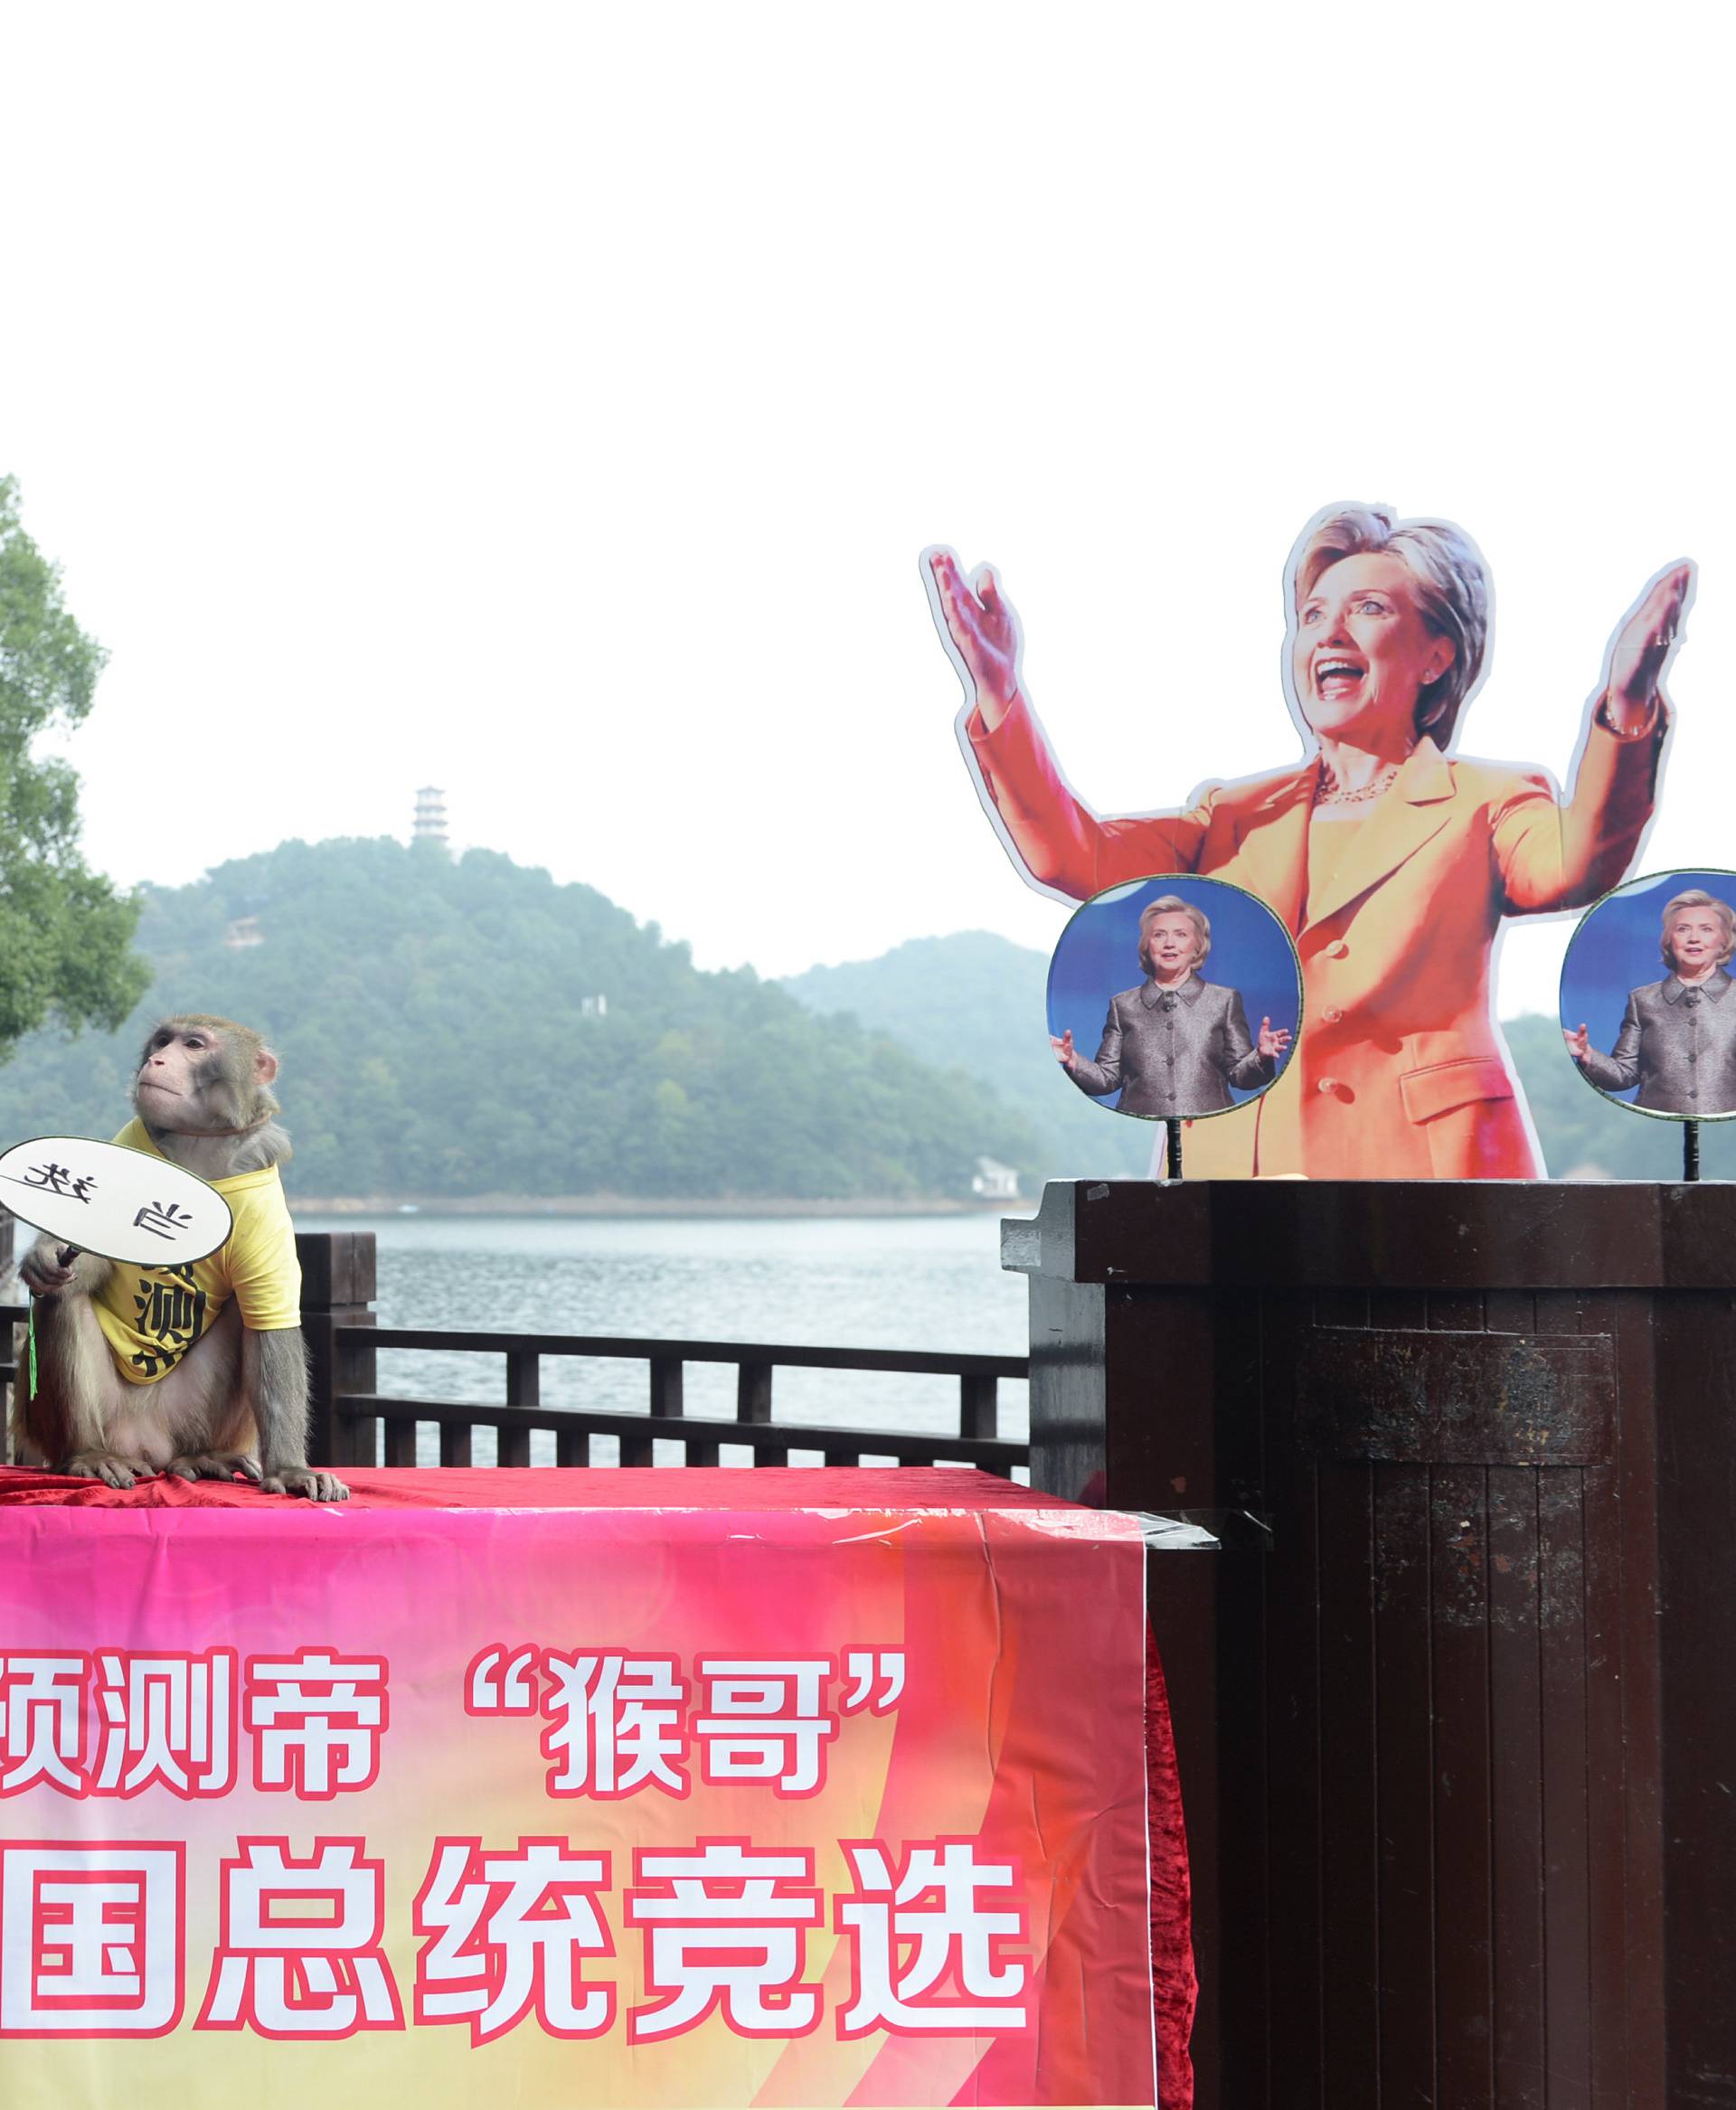 A monkey wearing a tee shirt with the characters "King of prediction" holds a card which reads "elected" between cardboard cutouts of Hillary Clinton and Donald Trump, in Changsha